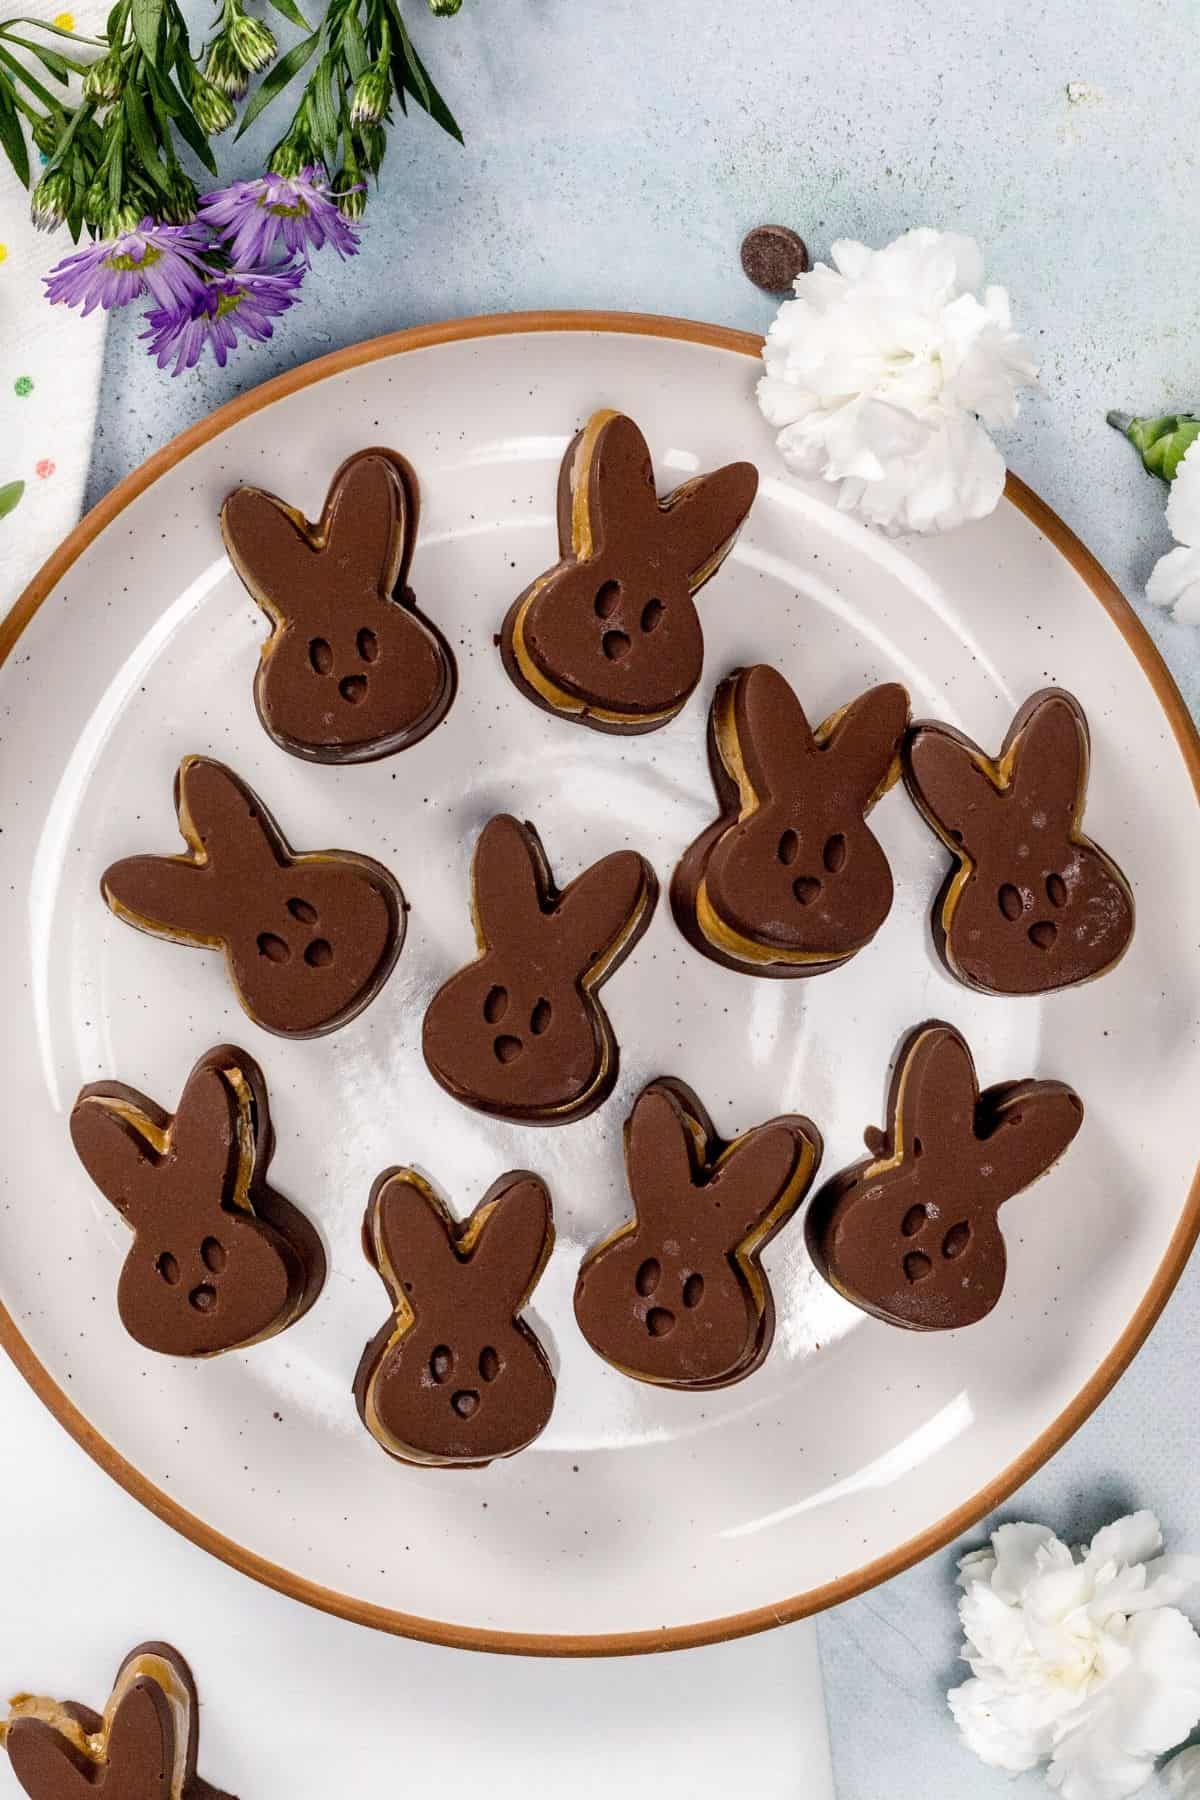 A close up of many sun butter bunny candies on a plate.